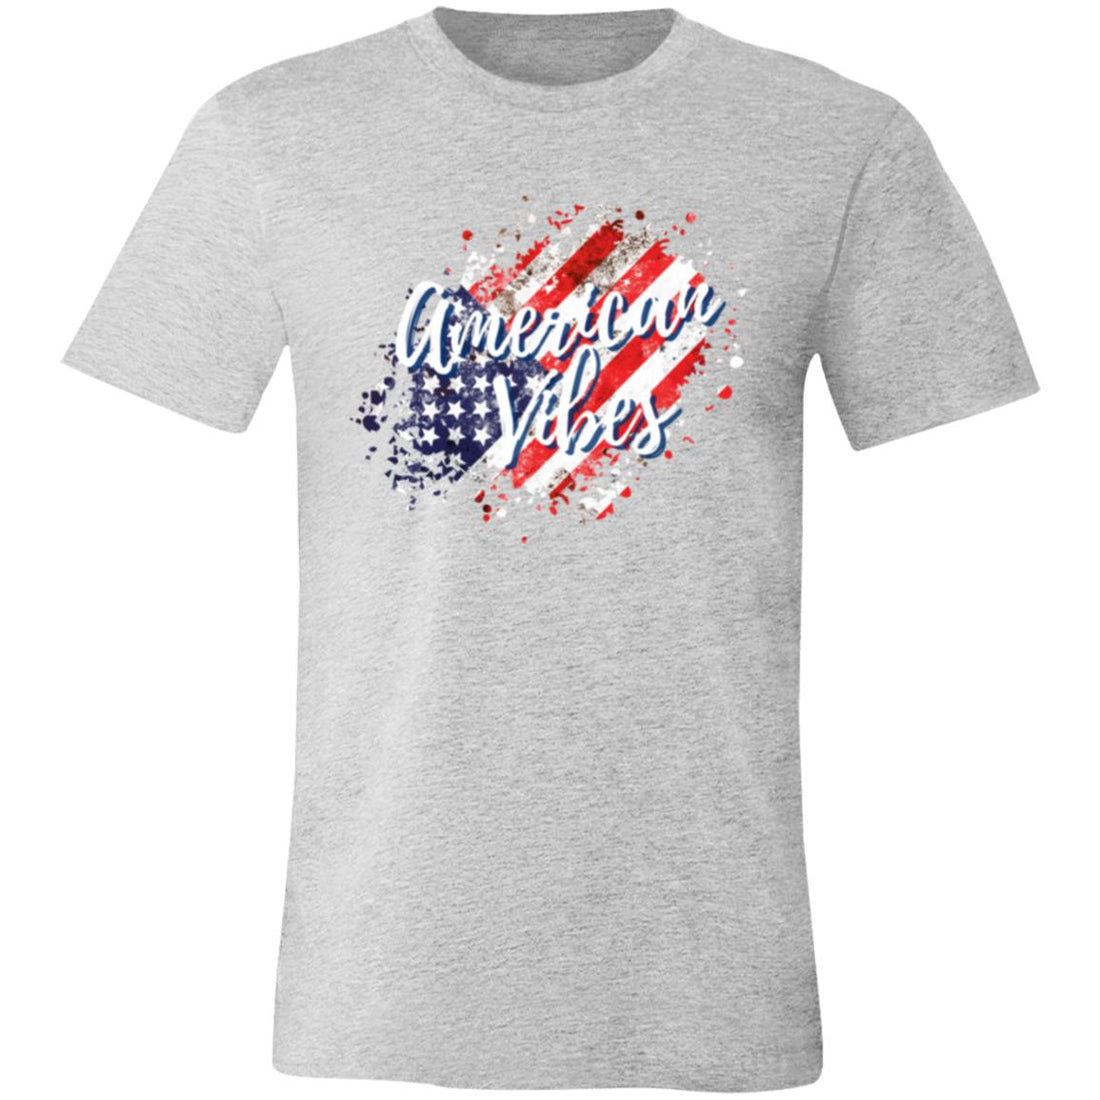 American Vibes T-Shirt - T-Shirts - Positively Sassy - American Vibes T-Shirt